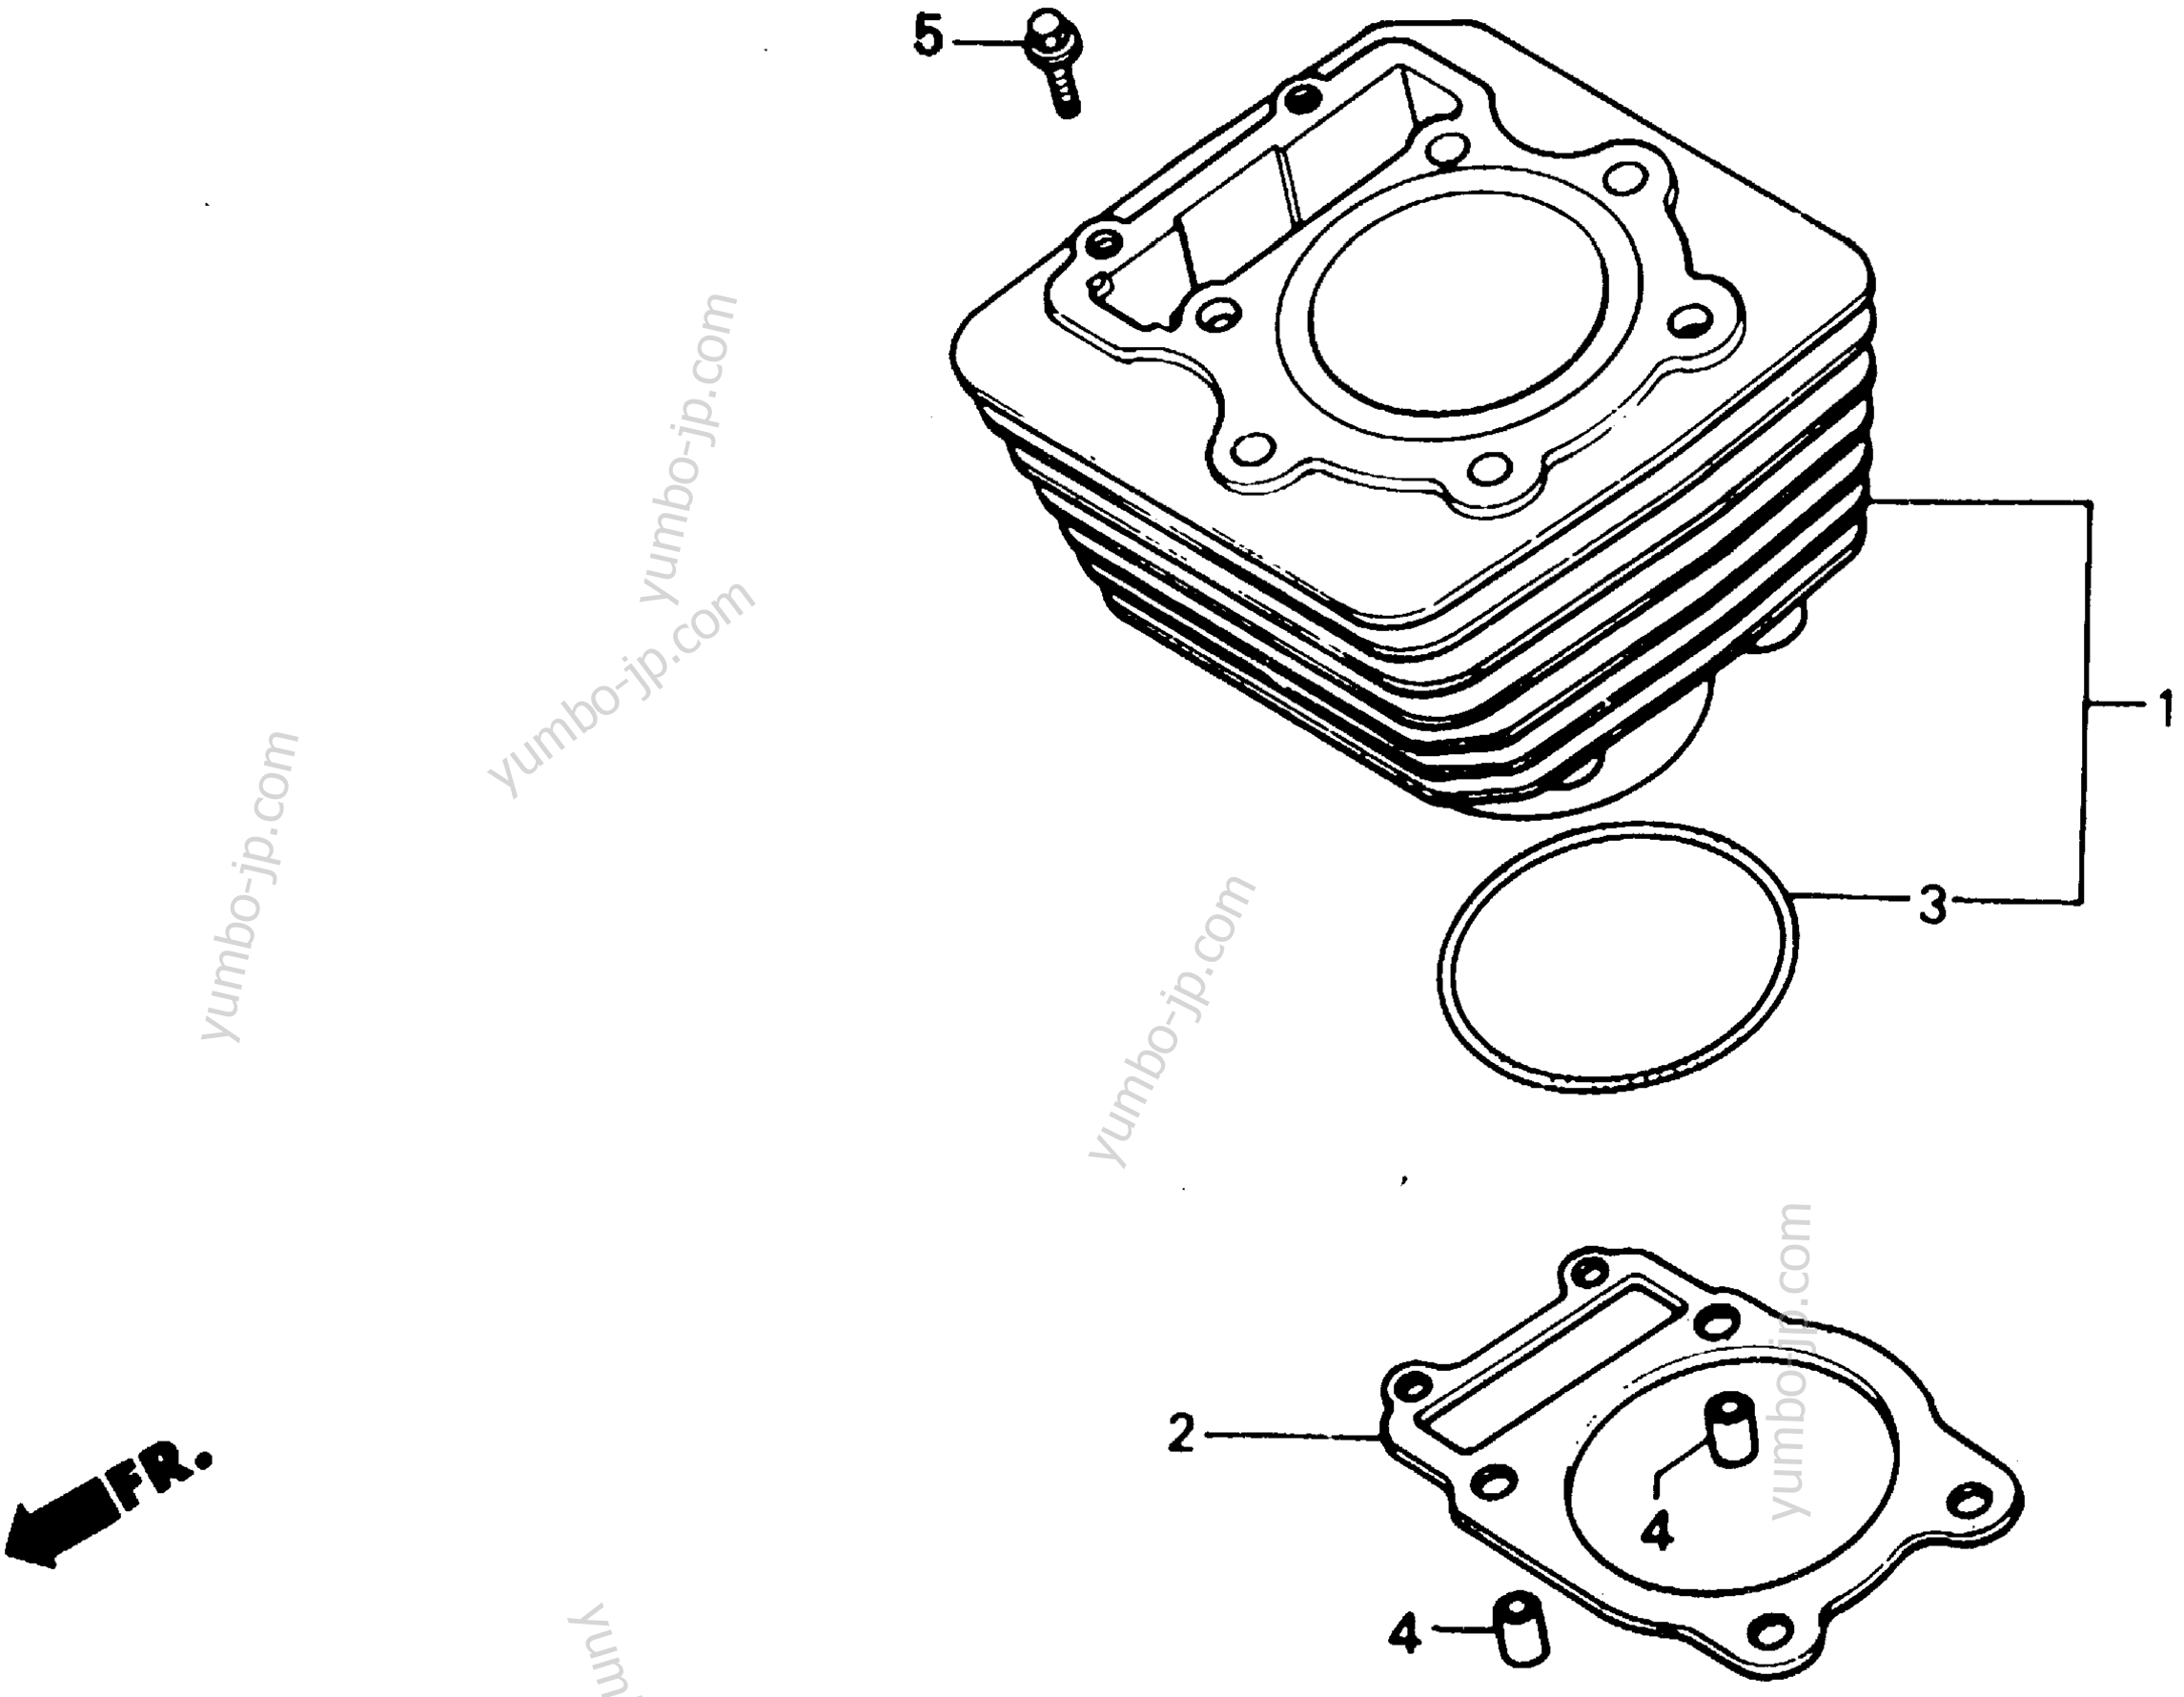 CYLINDER for ATVs HONDA TRX350 A 1987 year